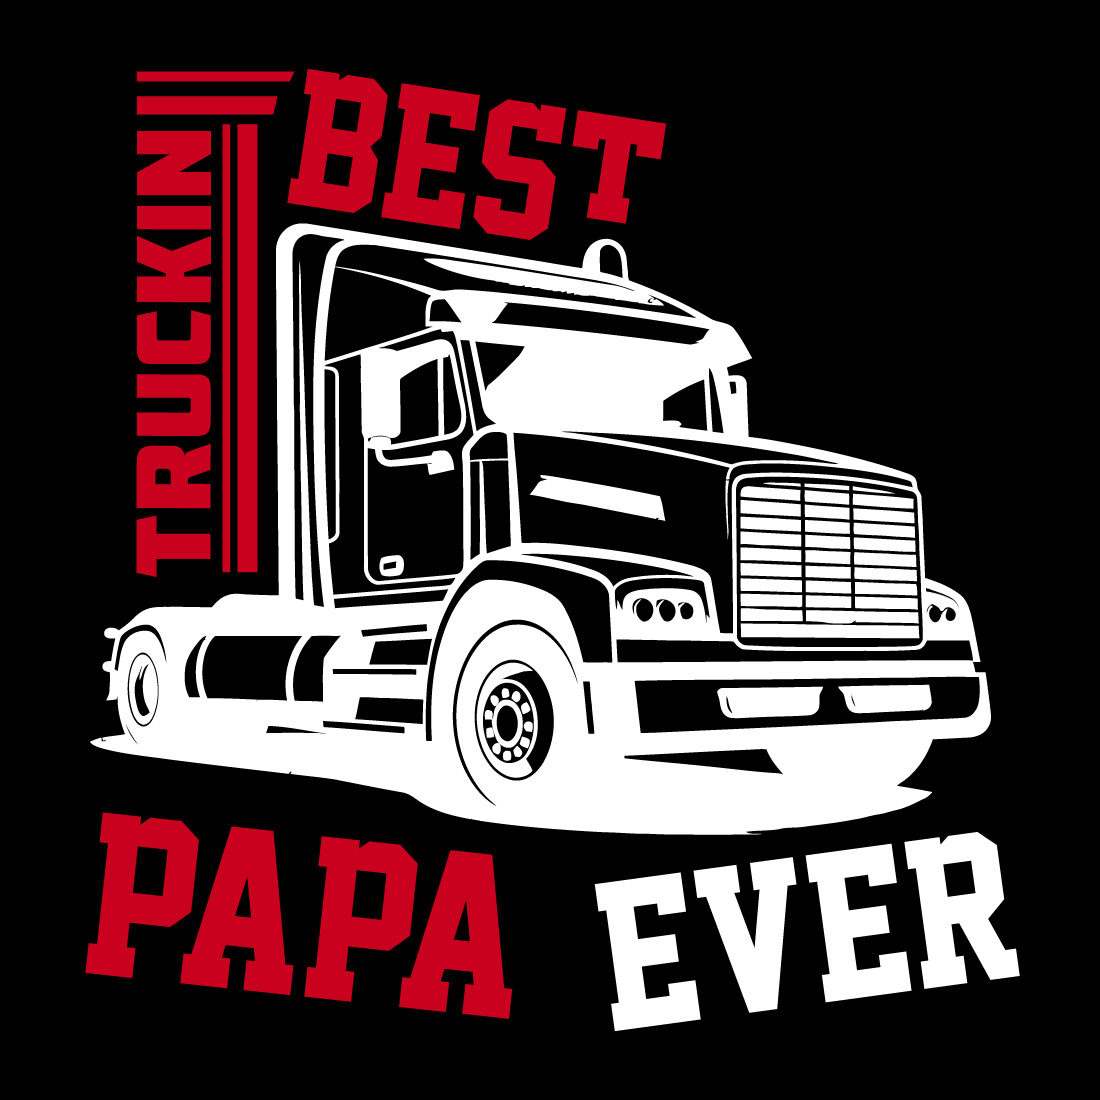 Father's Day T-Shirt- Dad T-Shirt Design- Father Day T-shirt- Happy Father's day t-shirt design ideas- Dad Day- Papa Son- fathers Day shirt ideas for family- T-shirt Design- Typography T-shirt preview image.